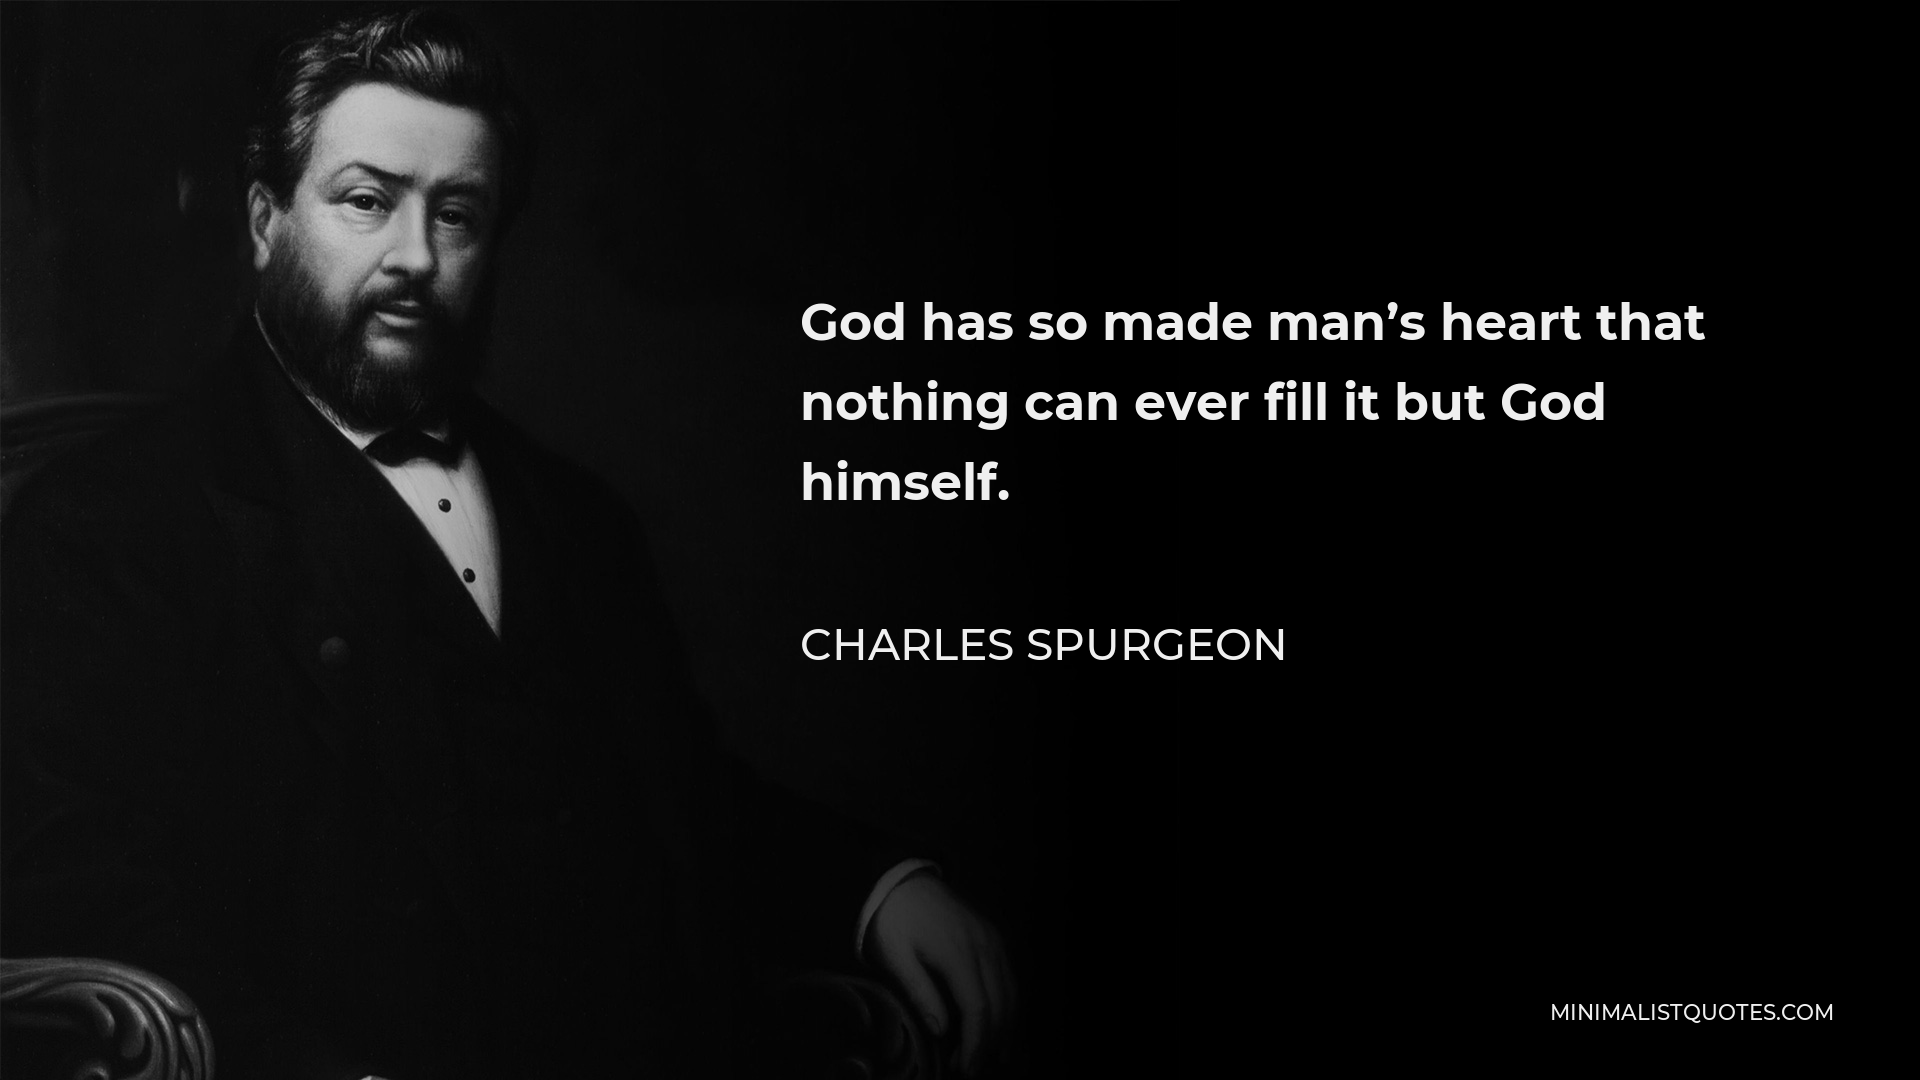 Charles Spurgeon Quote - God has so made man’s heart that nothing can ever fill it but God himself.